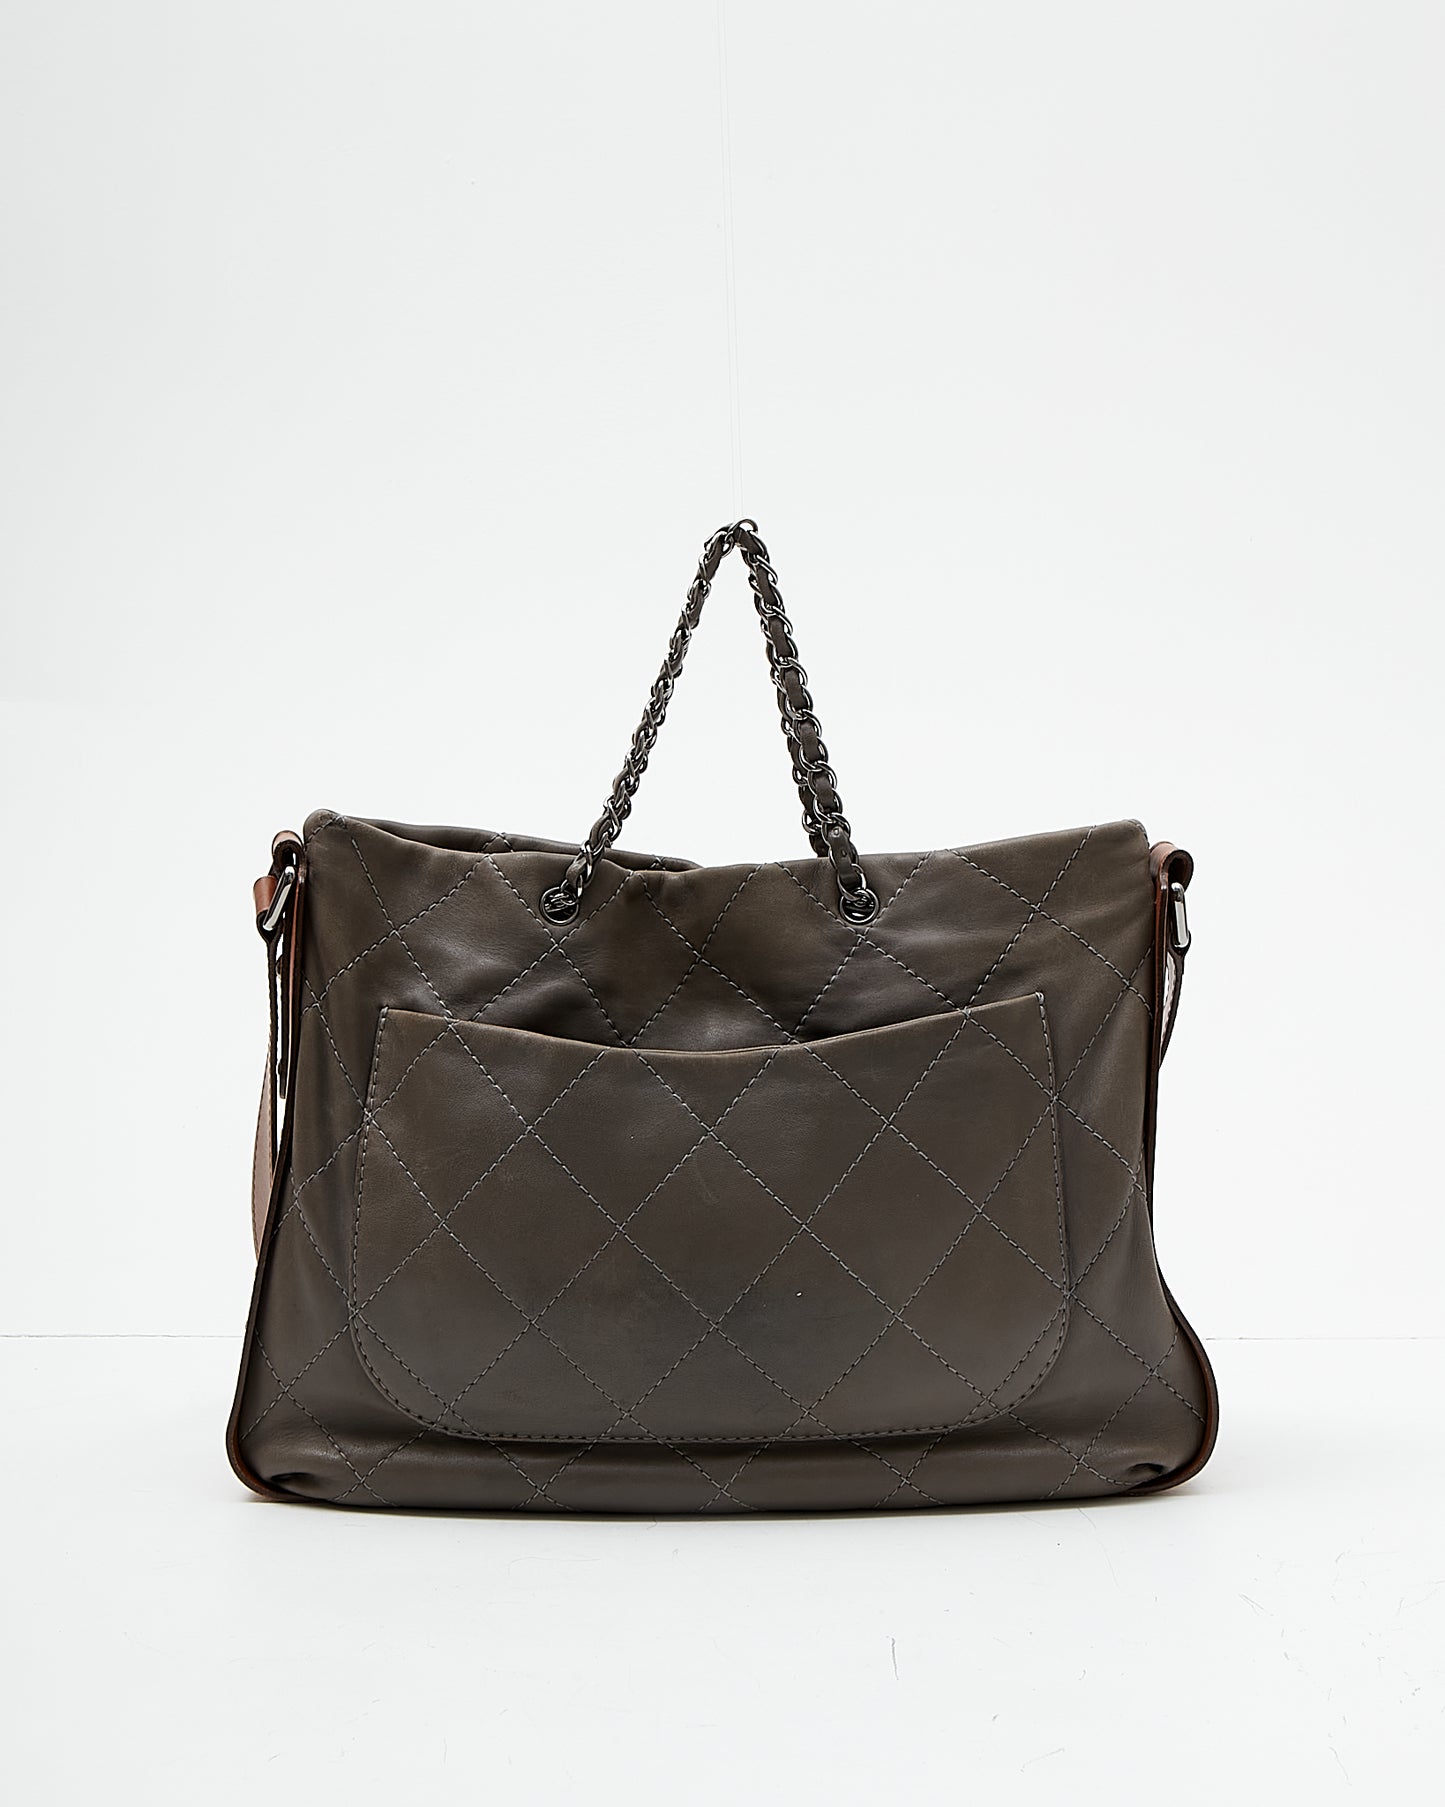 Chanel Grey/Tan Quilted Leather Convertible Messenger Tote Bag